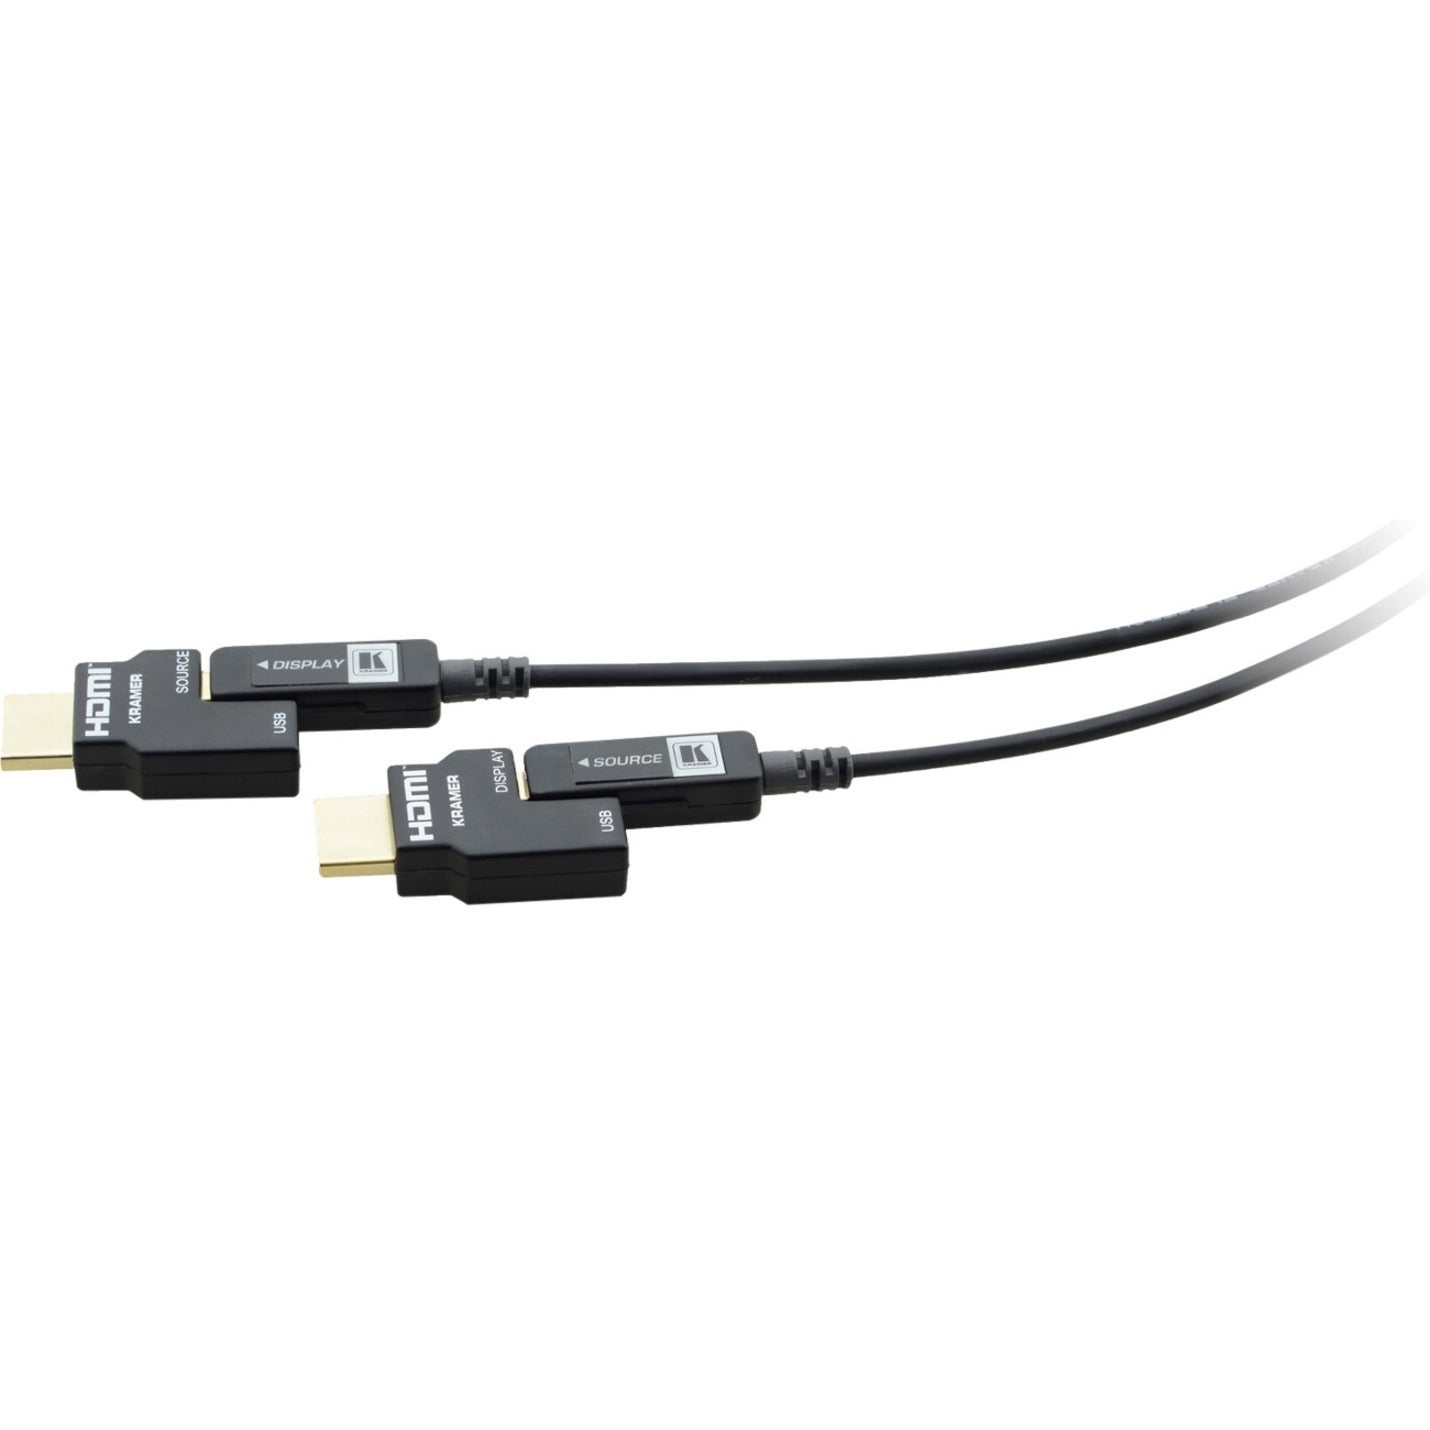 Kramer CP-AOCH/60-50 Active Optical 4K Pluggable HDMI Cable, 49.87 ft, Gold-Plated Connectors, EMI/RF Protection